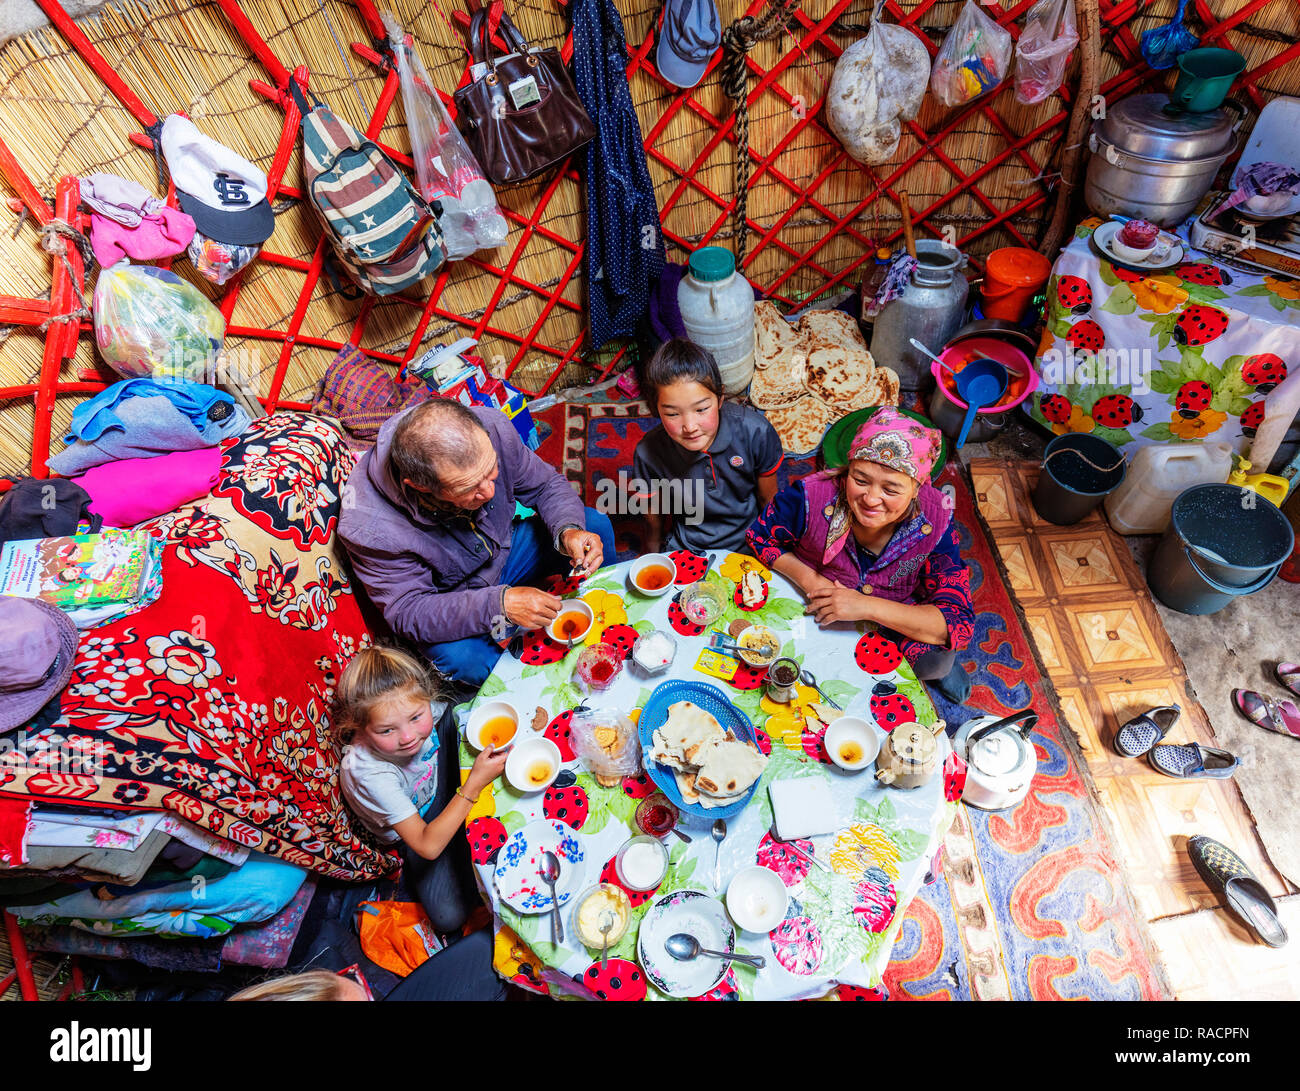 Local family in a yurt stay near Songkol lake, Kyrgyzstan, Central Asia, Asia Stock Photo